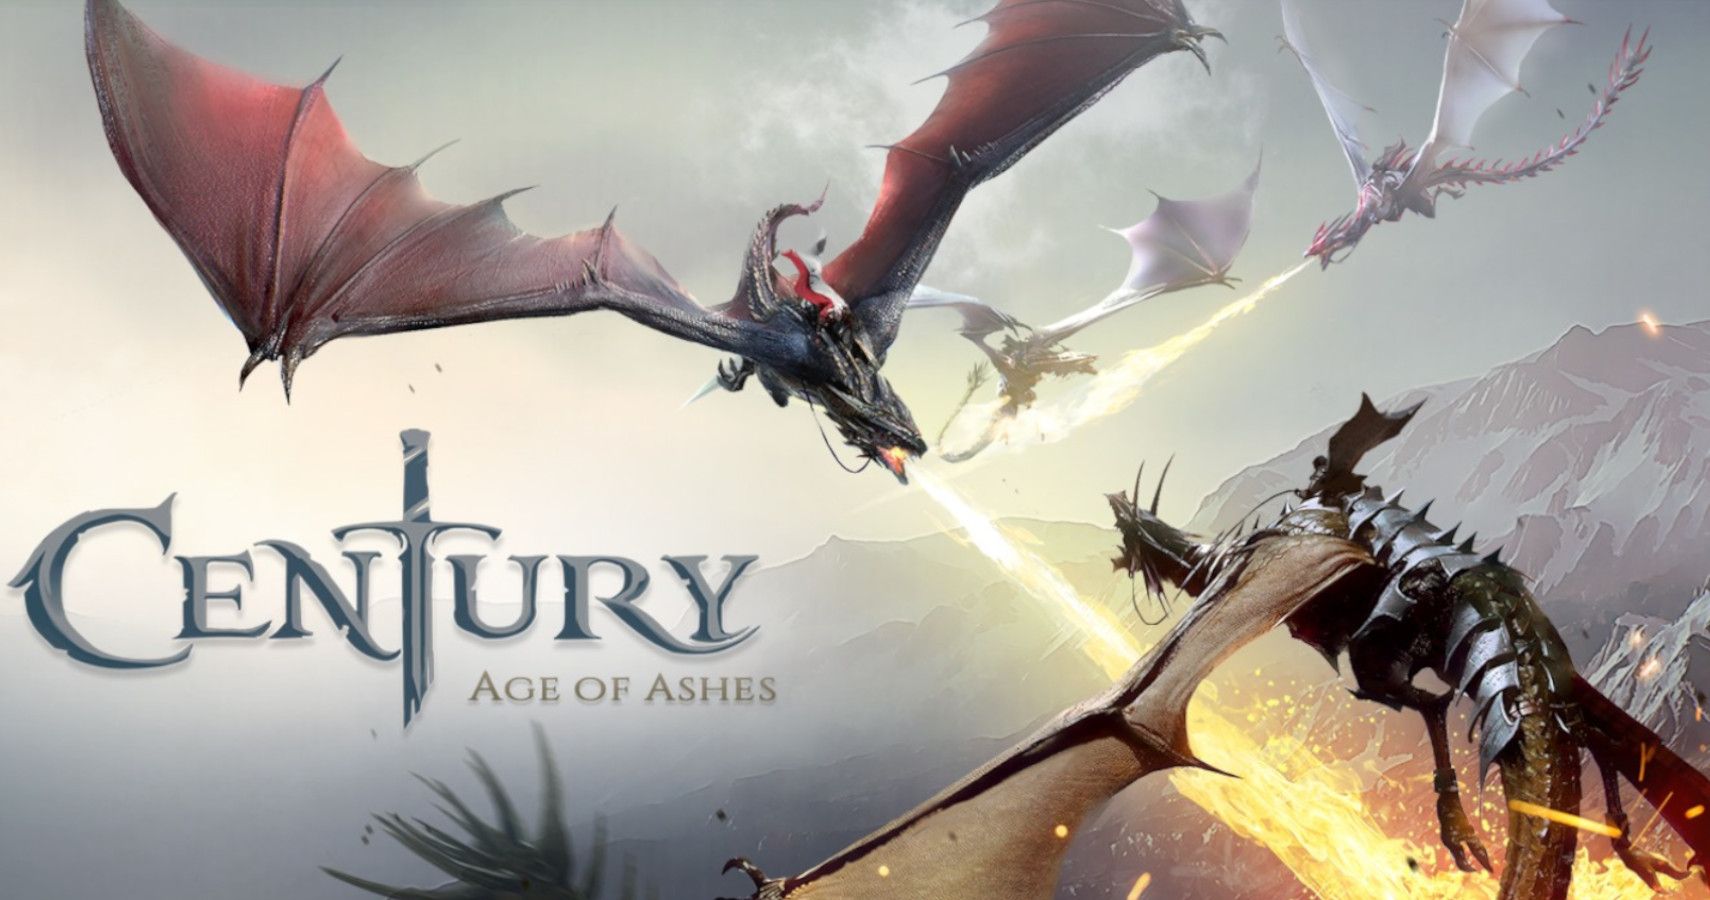 century: age of ashes dragon pass